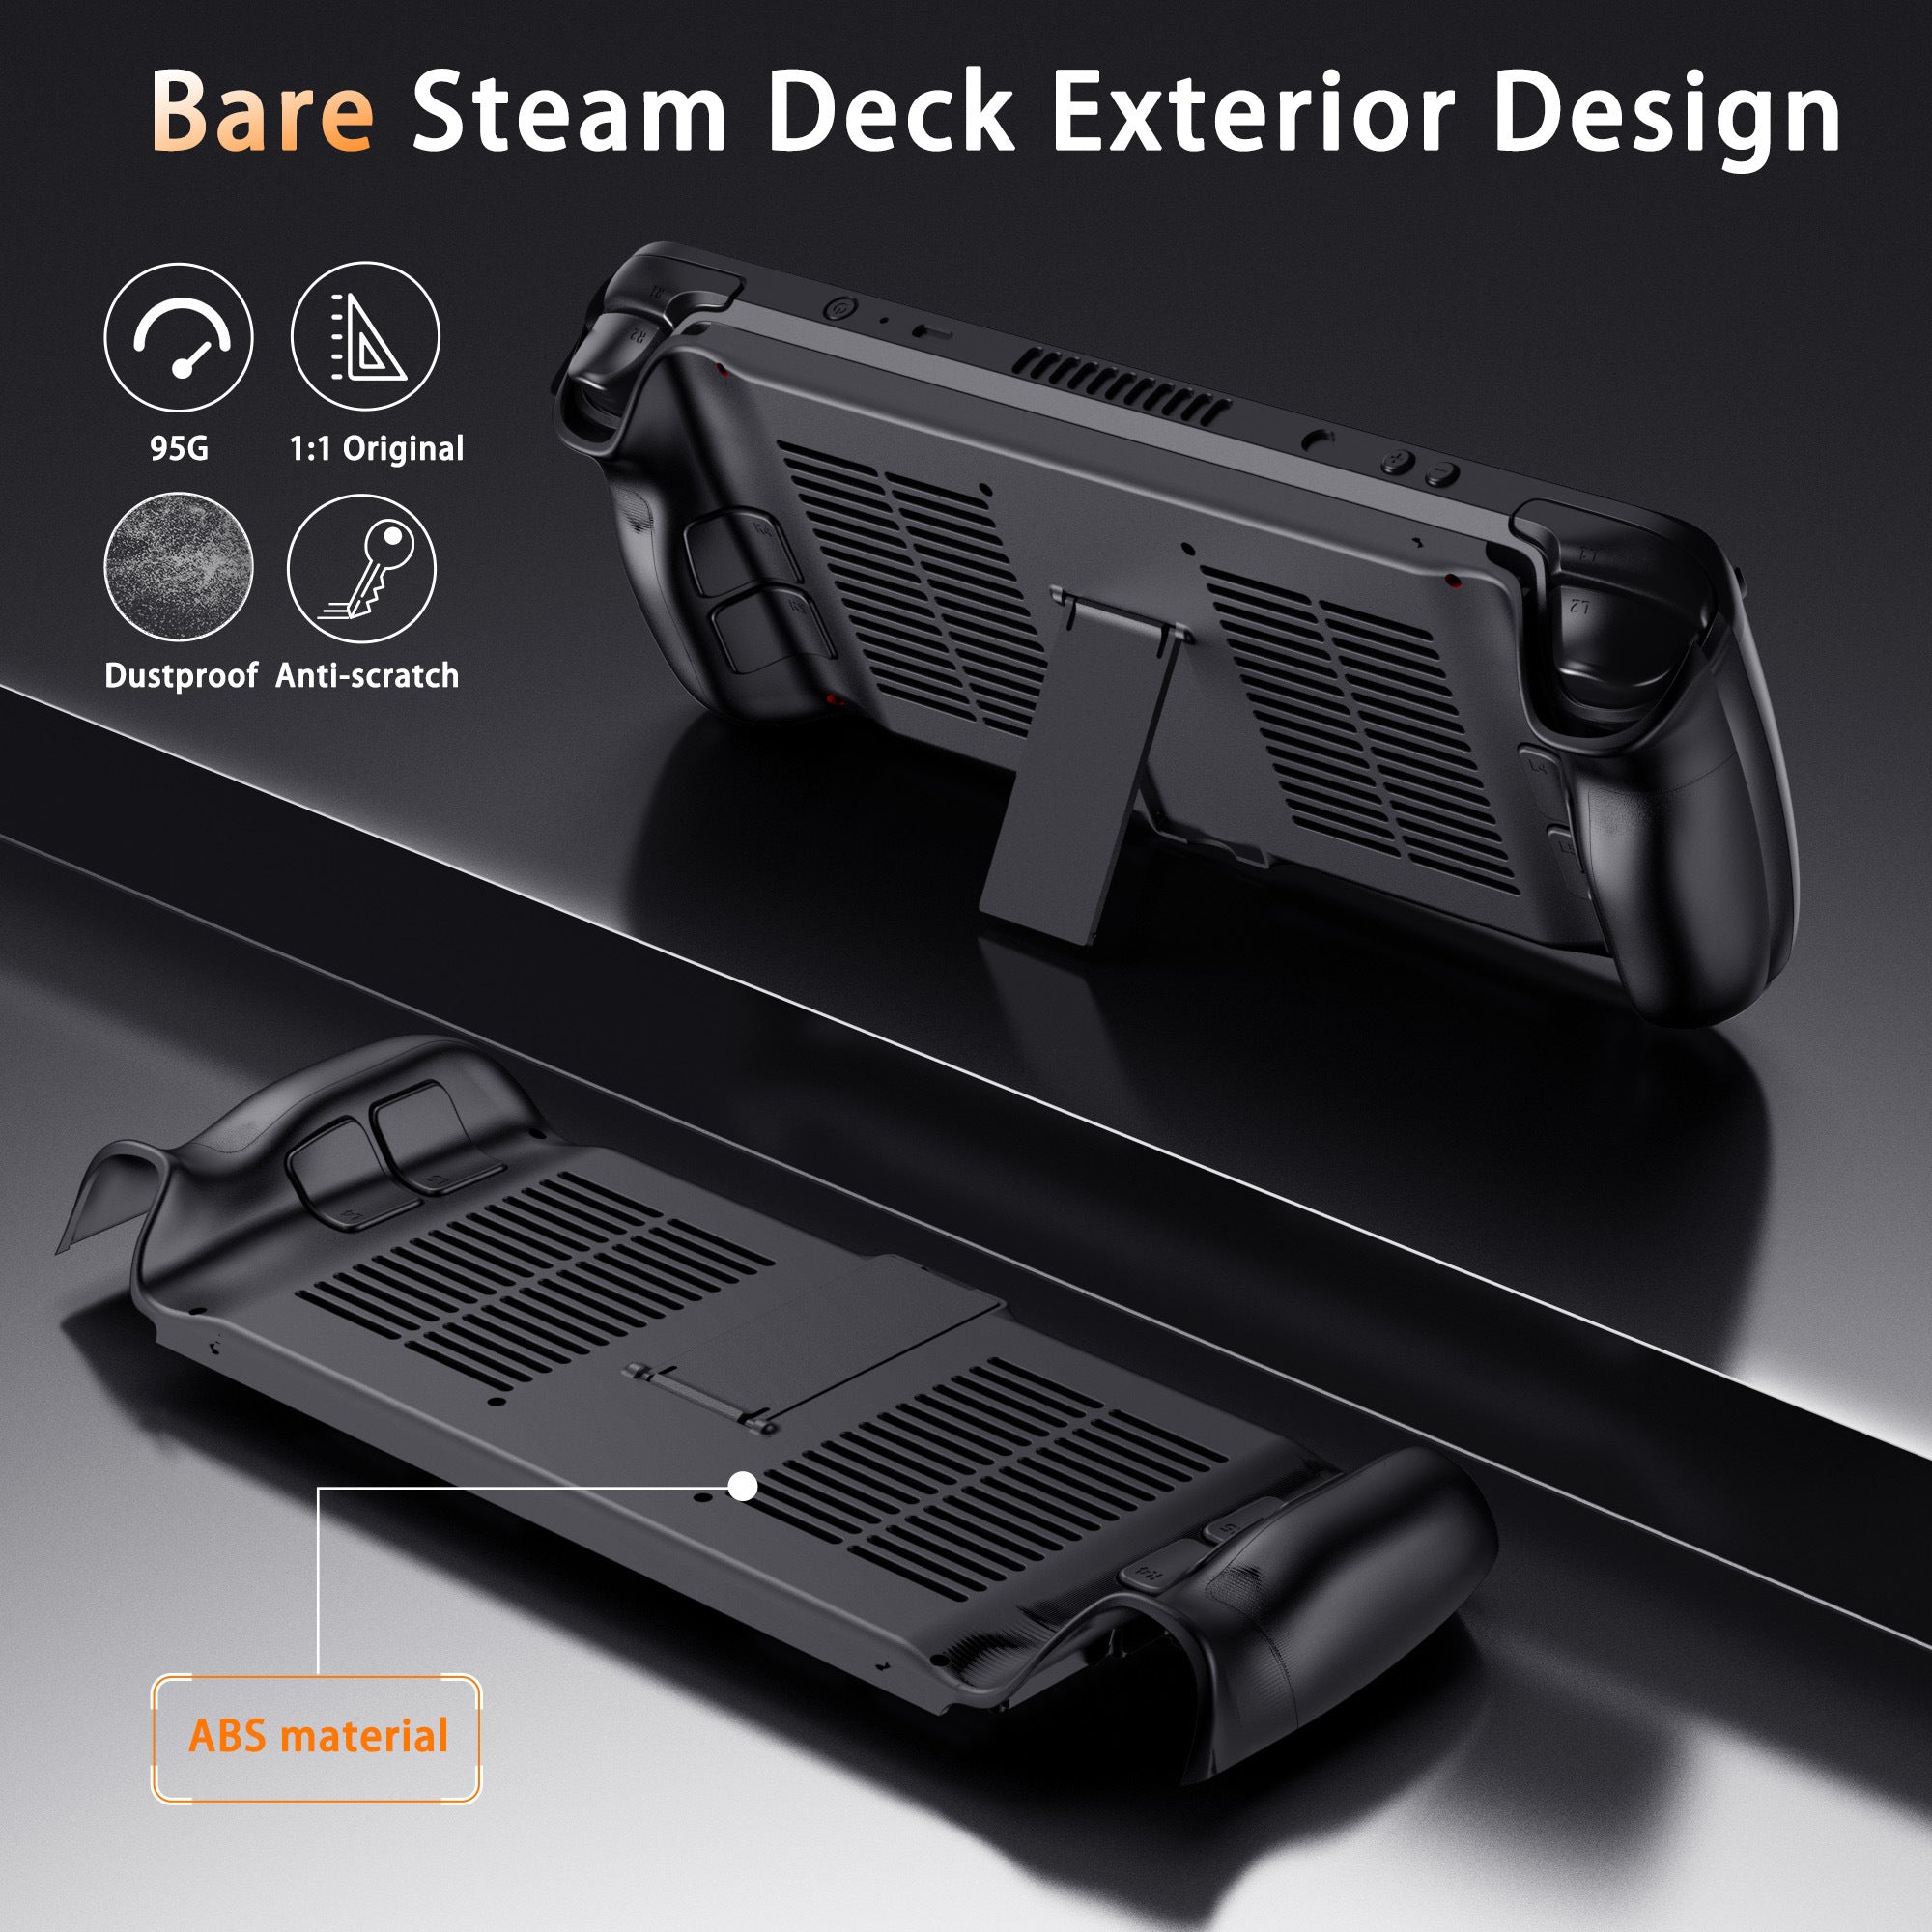 Unique Backshell for Steam Deck Case with Cooling Vents and Stand offers easy installation, quality material, and a cooling design.